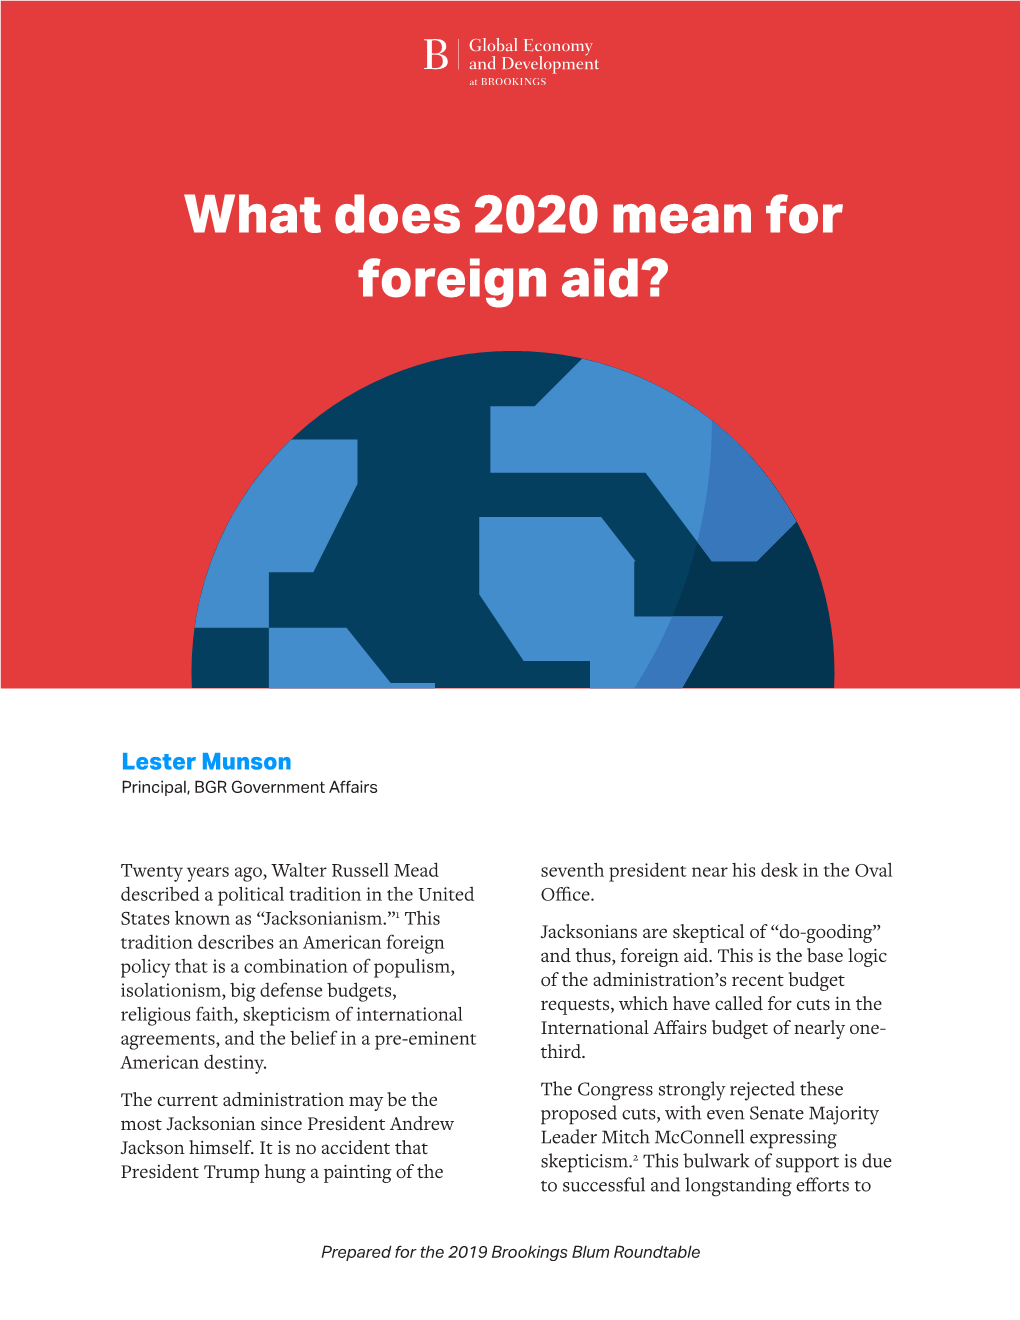 What Does 2020 Mean for Foreign Aid?